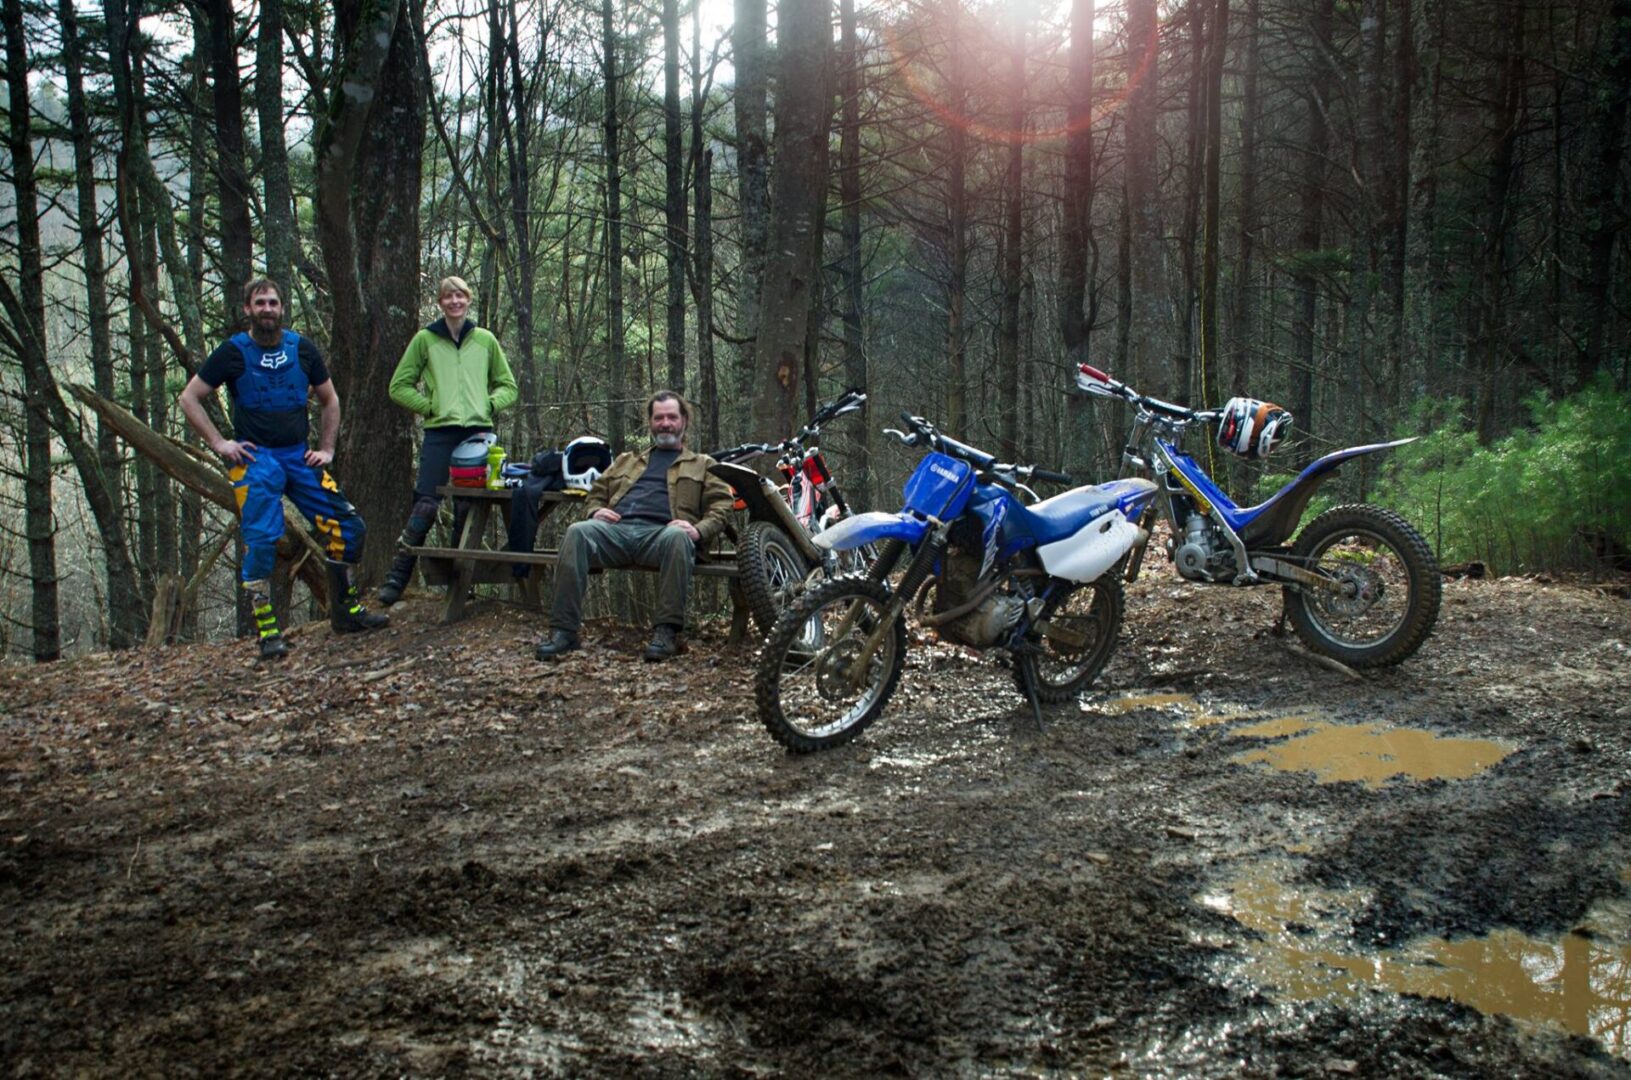 A group of people sitting around a dirt bike.